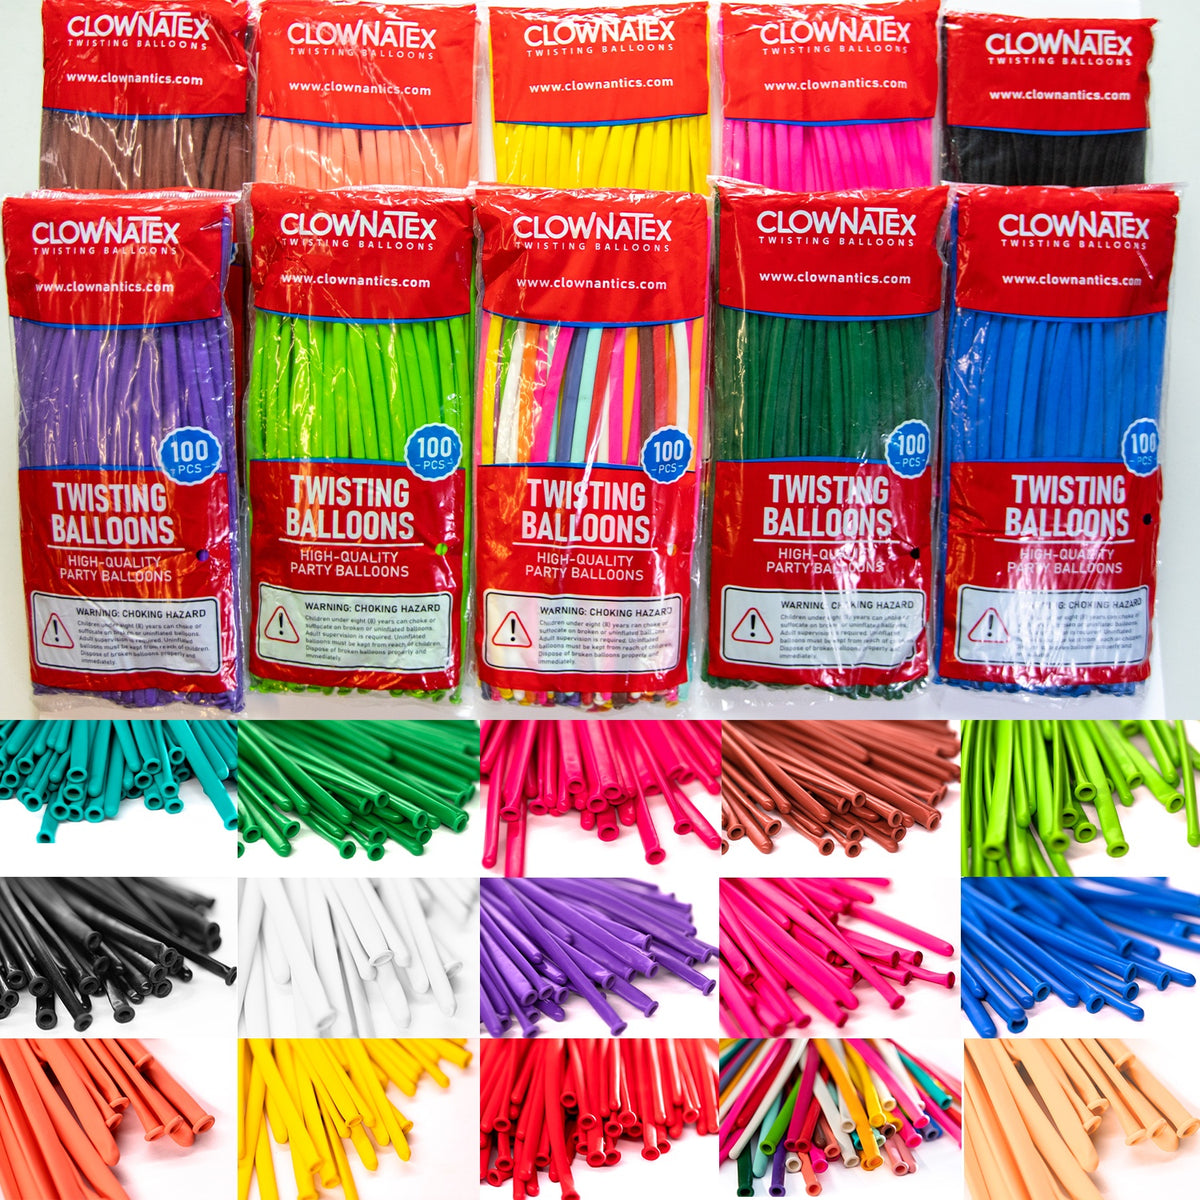 Clownatex 260 Twisting Balloons - Assorted Party Pack (100/bag)